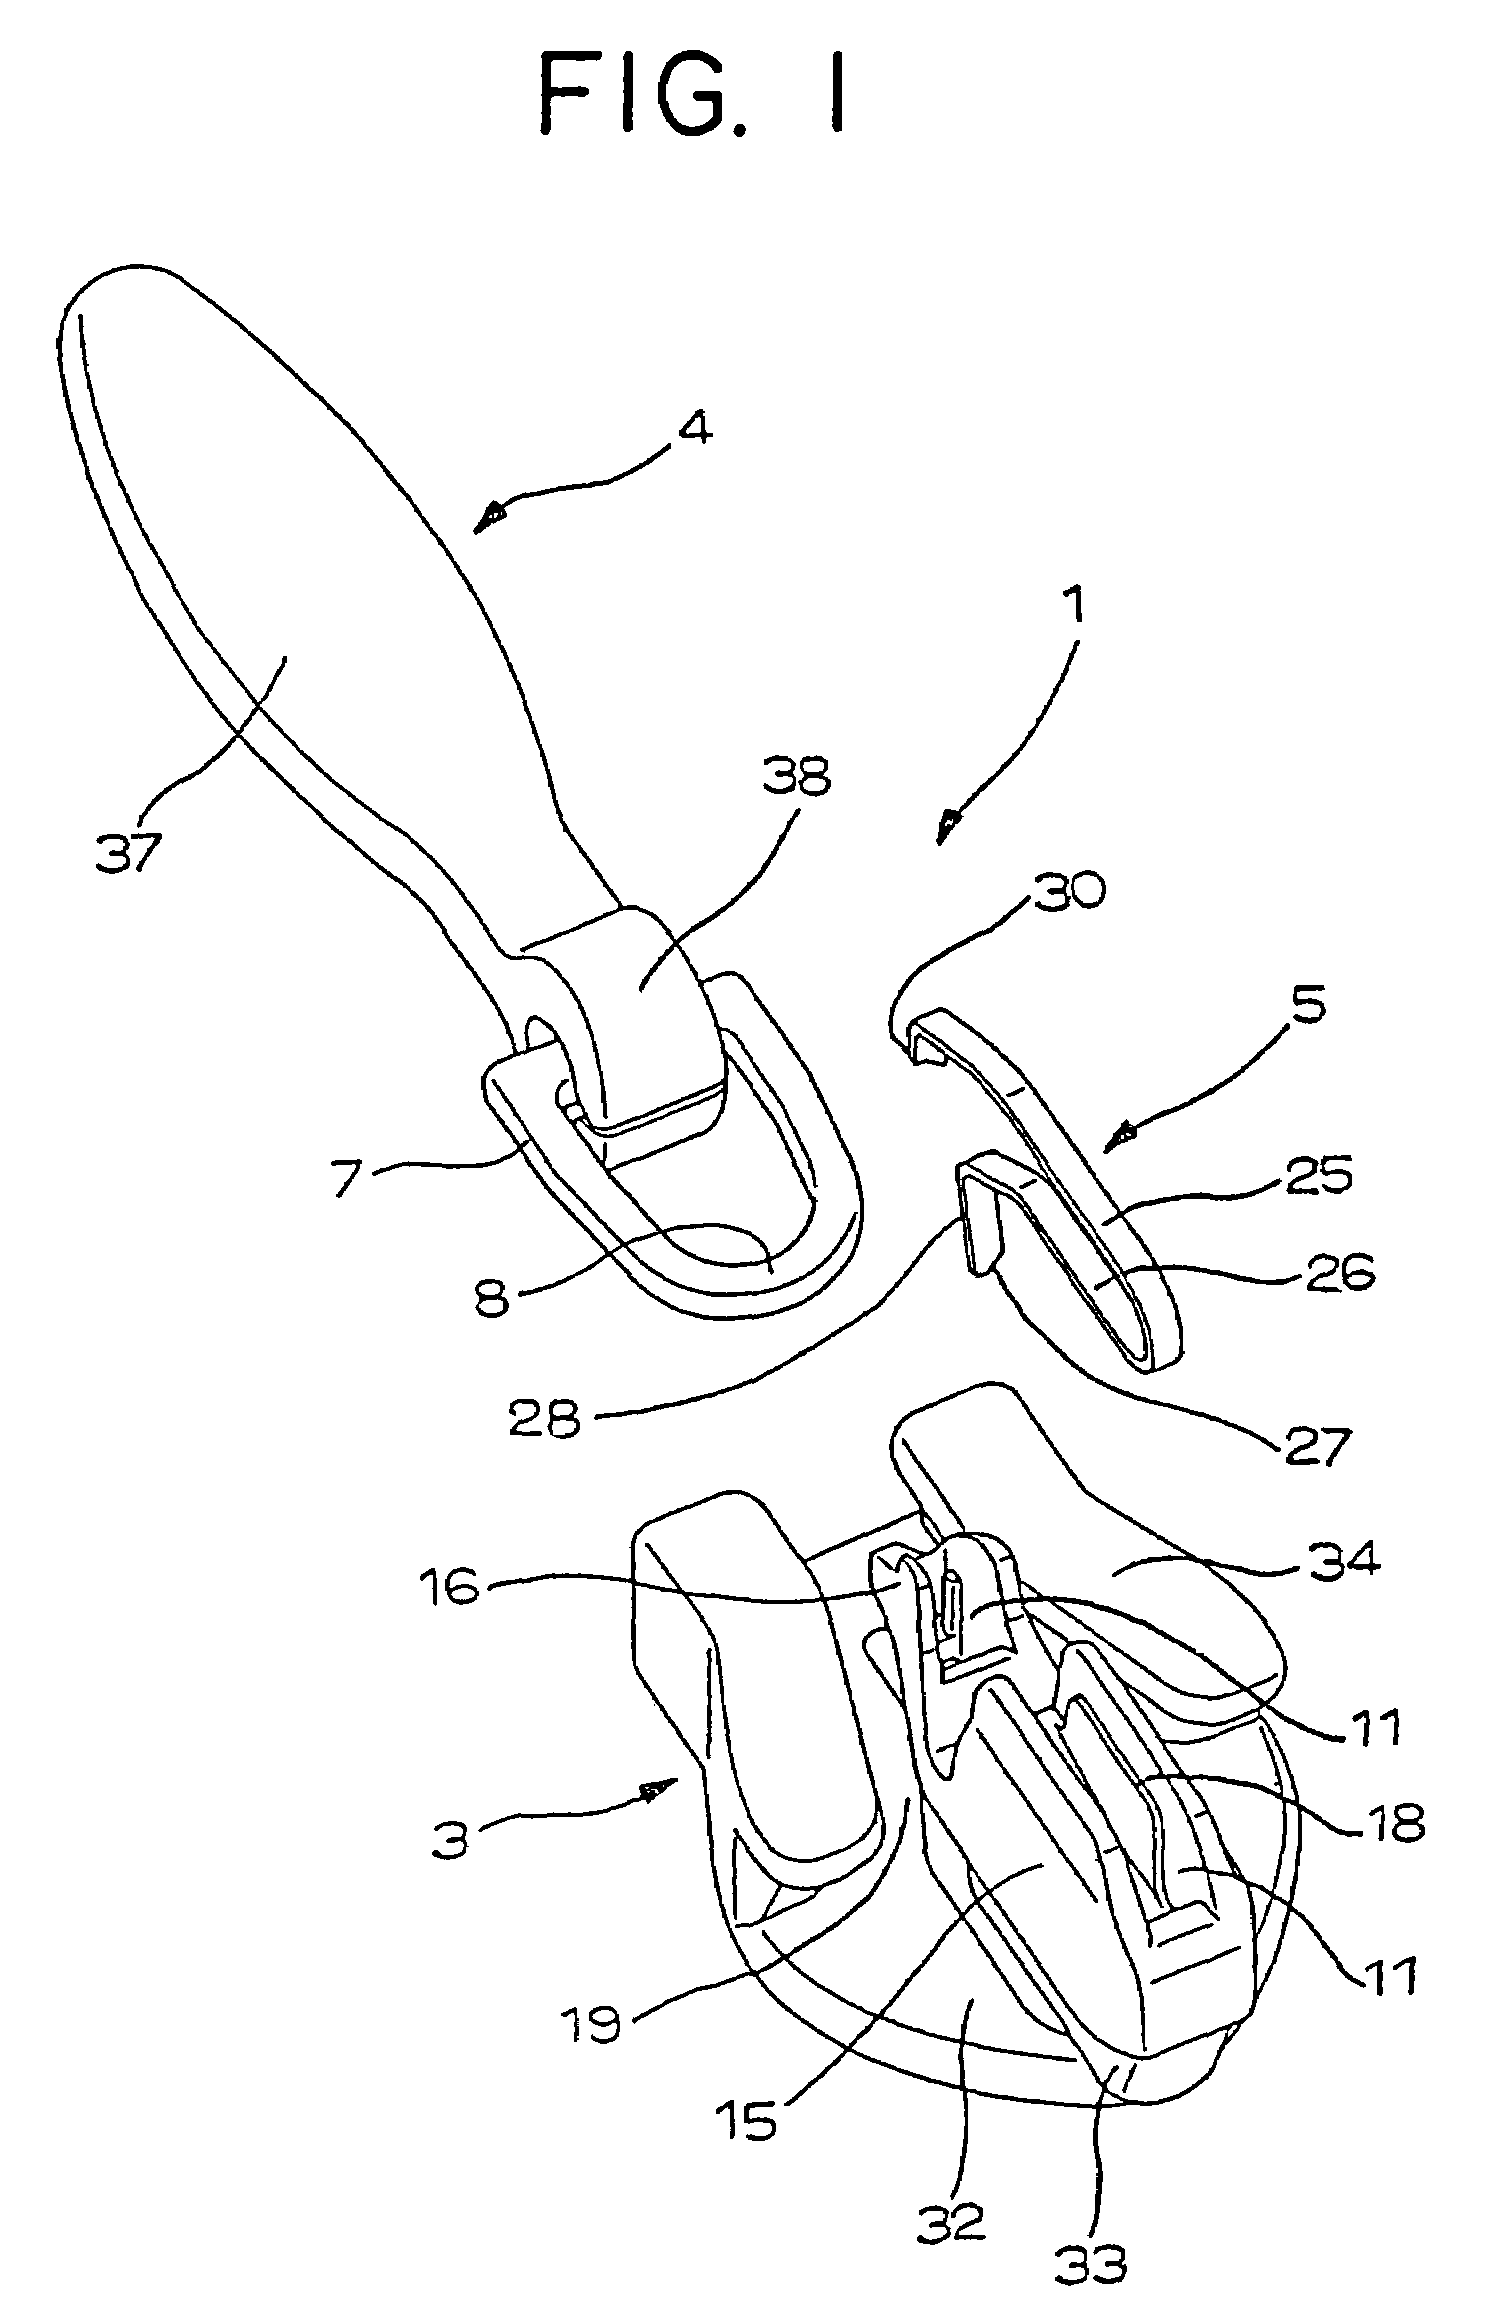 Slider for slide fastener provided with automatic locking device